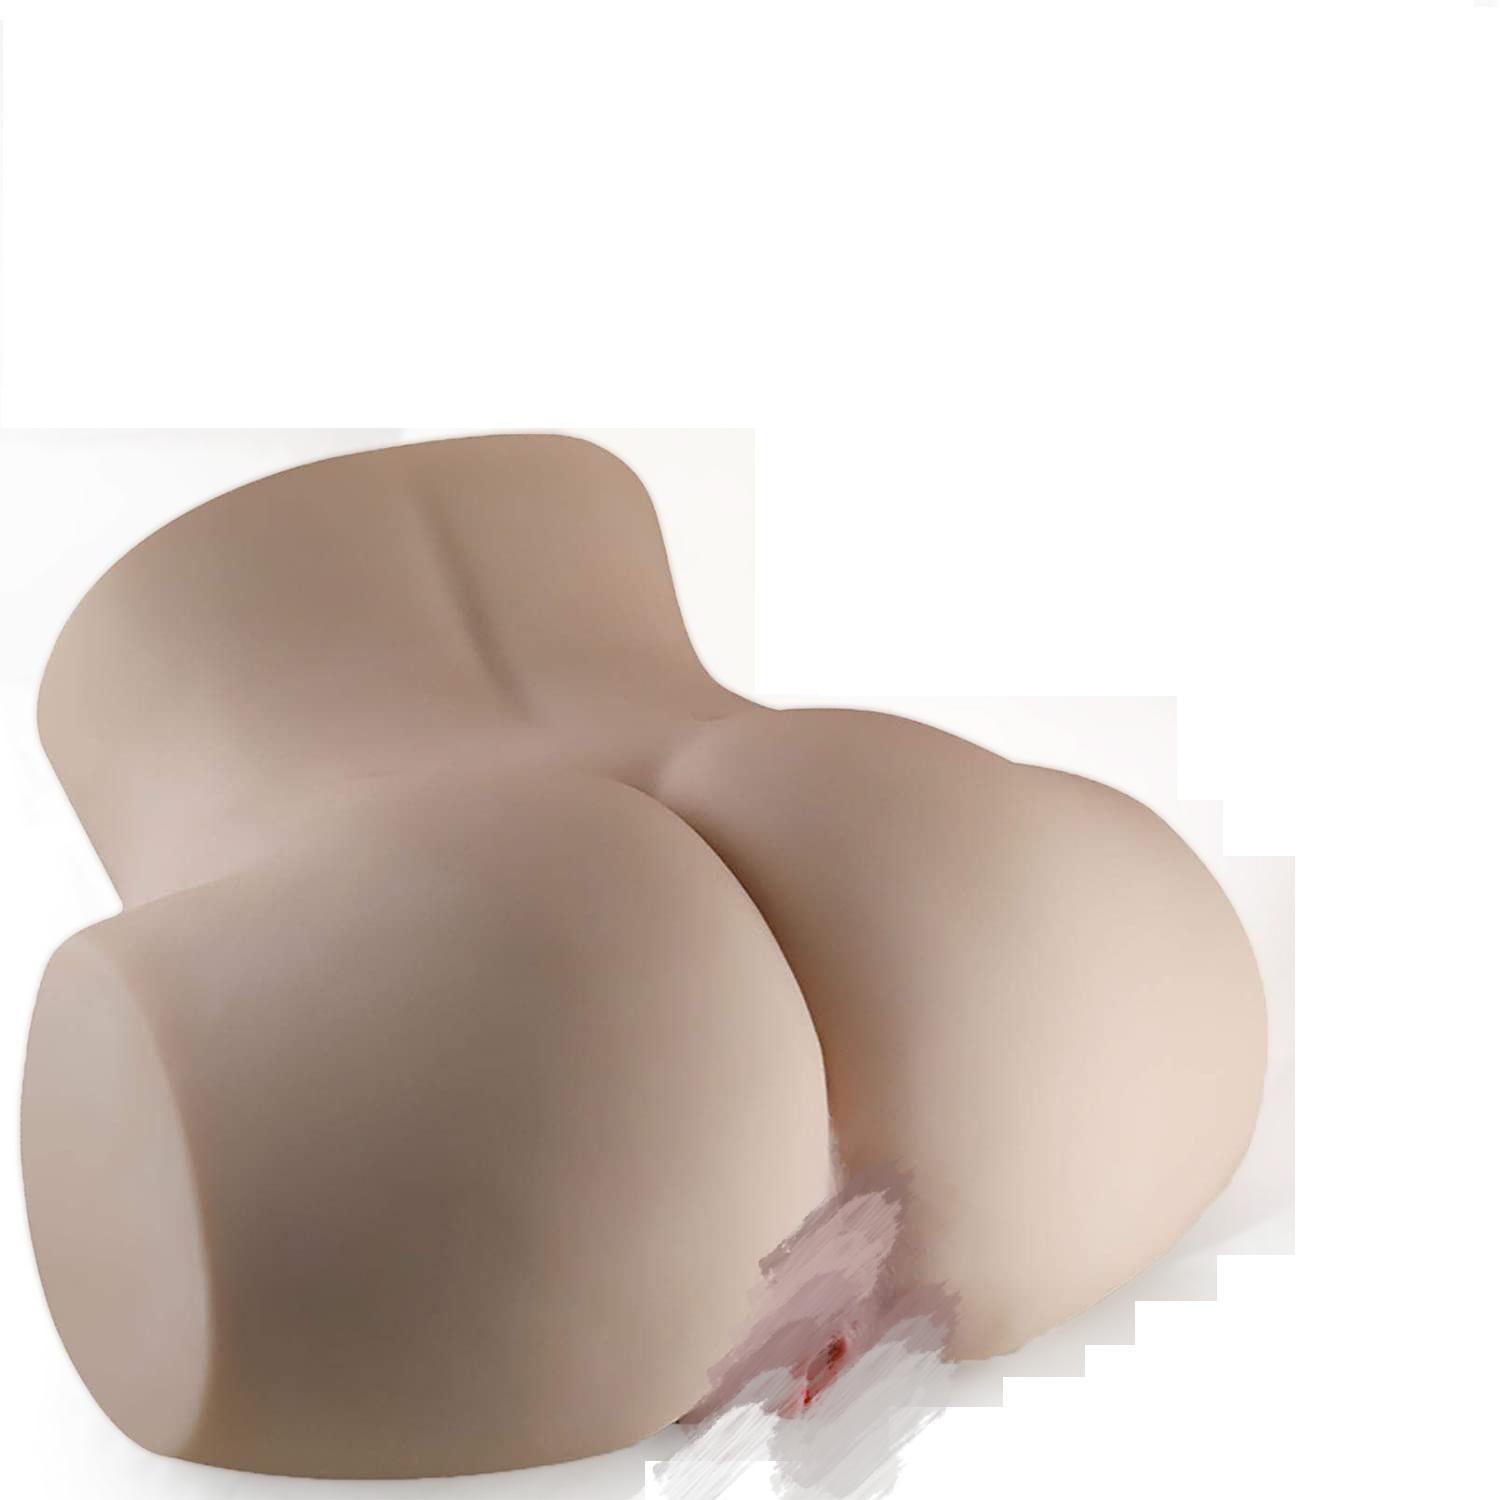 Sex Doll for Men RealIstIc Pocket pussy with tight Vagina and Anal 2 S